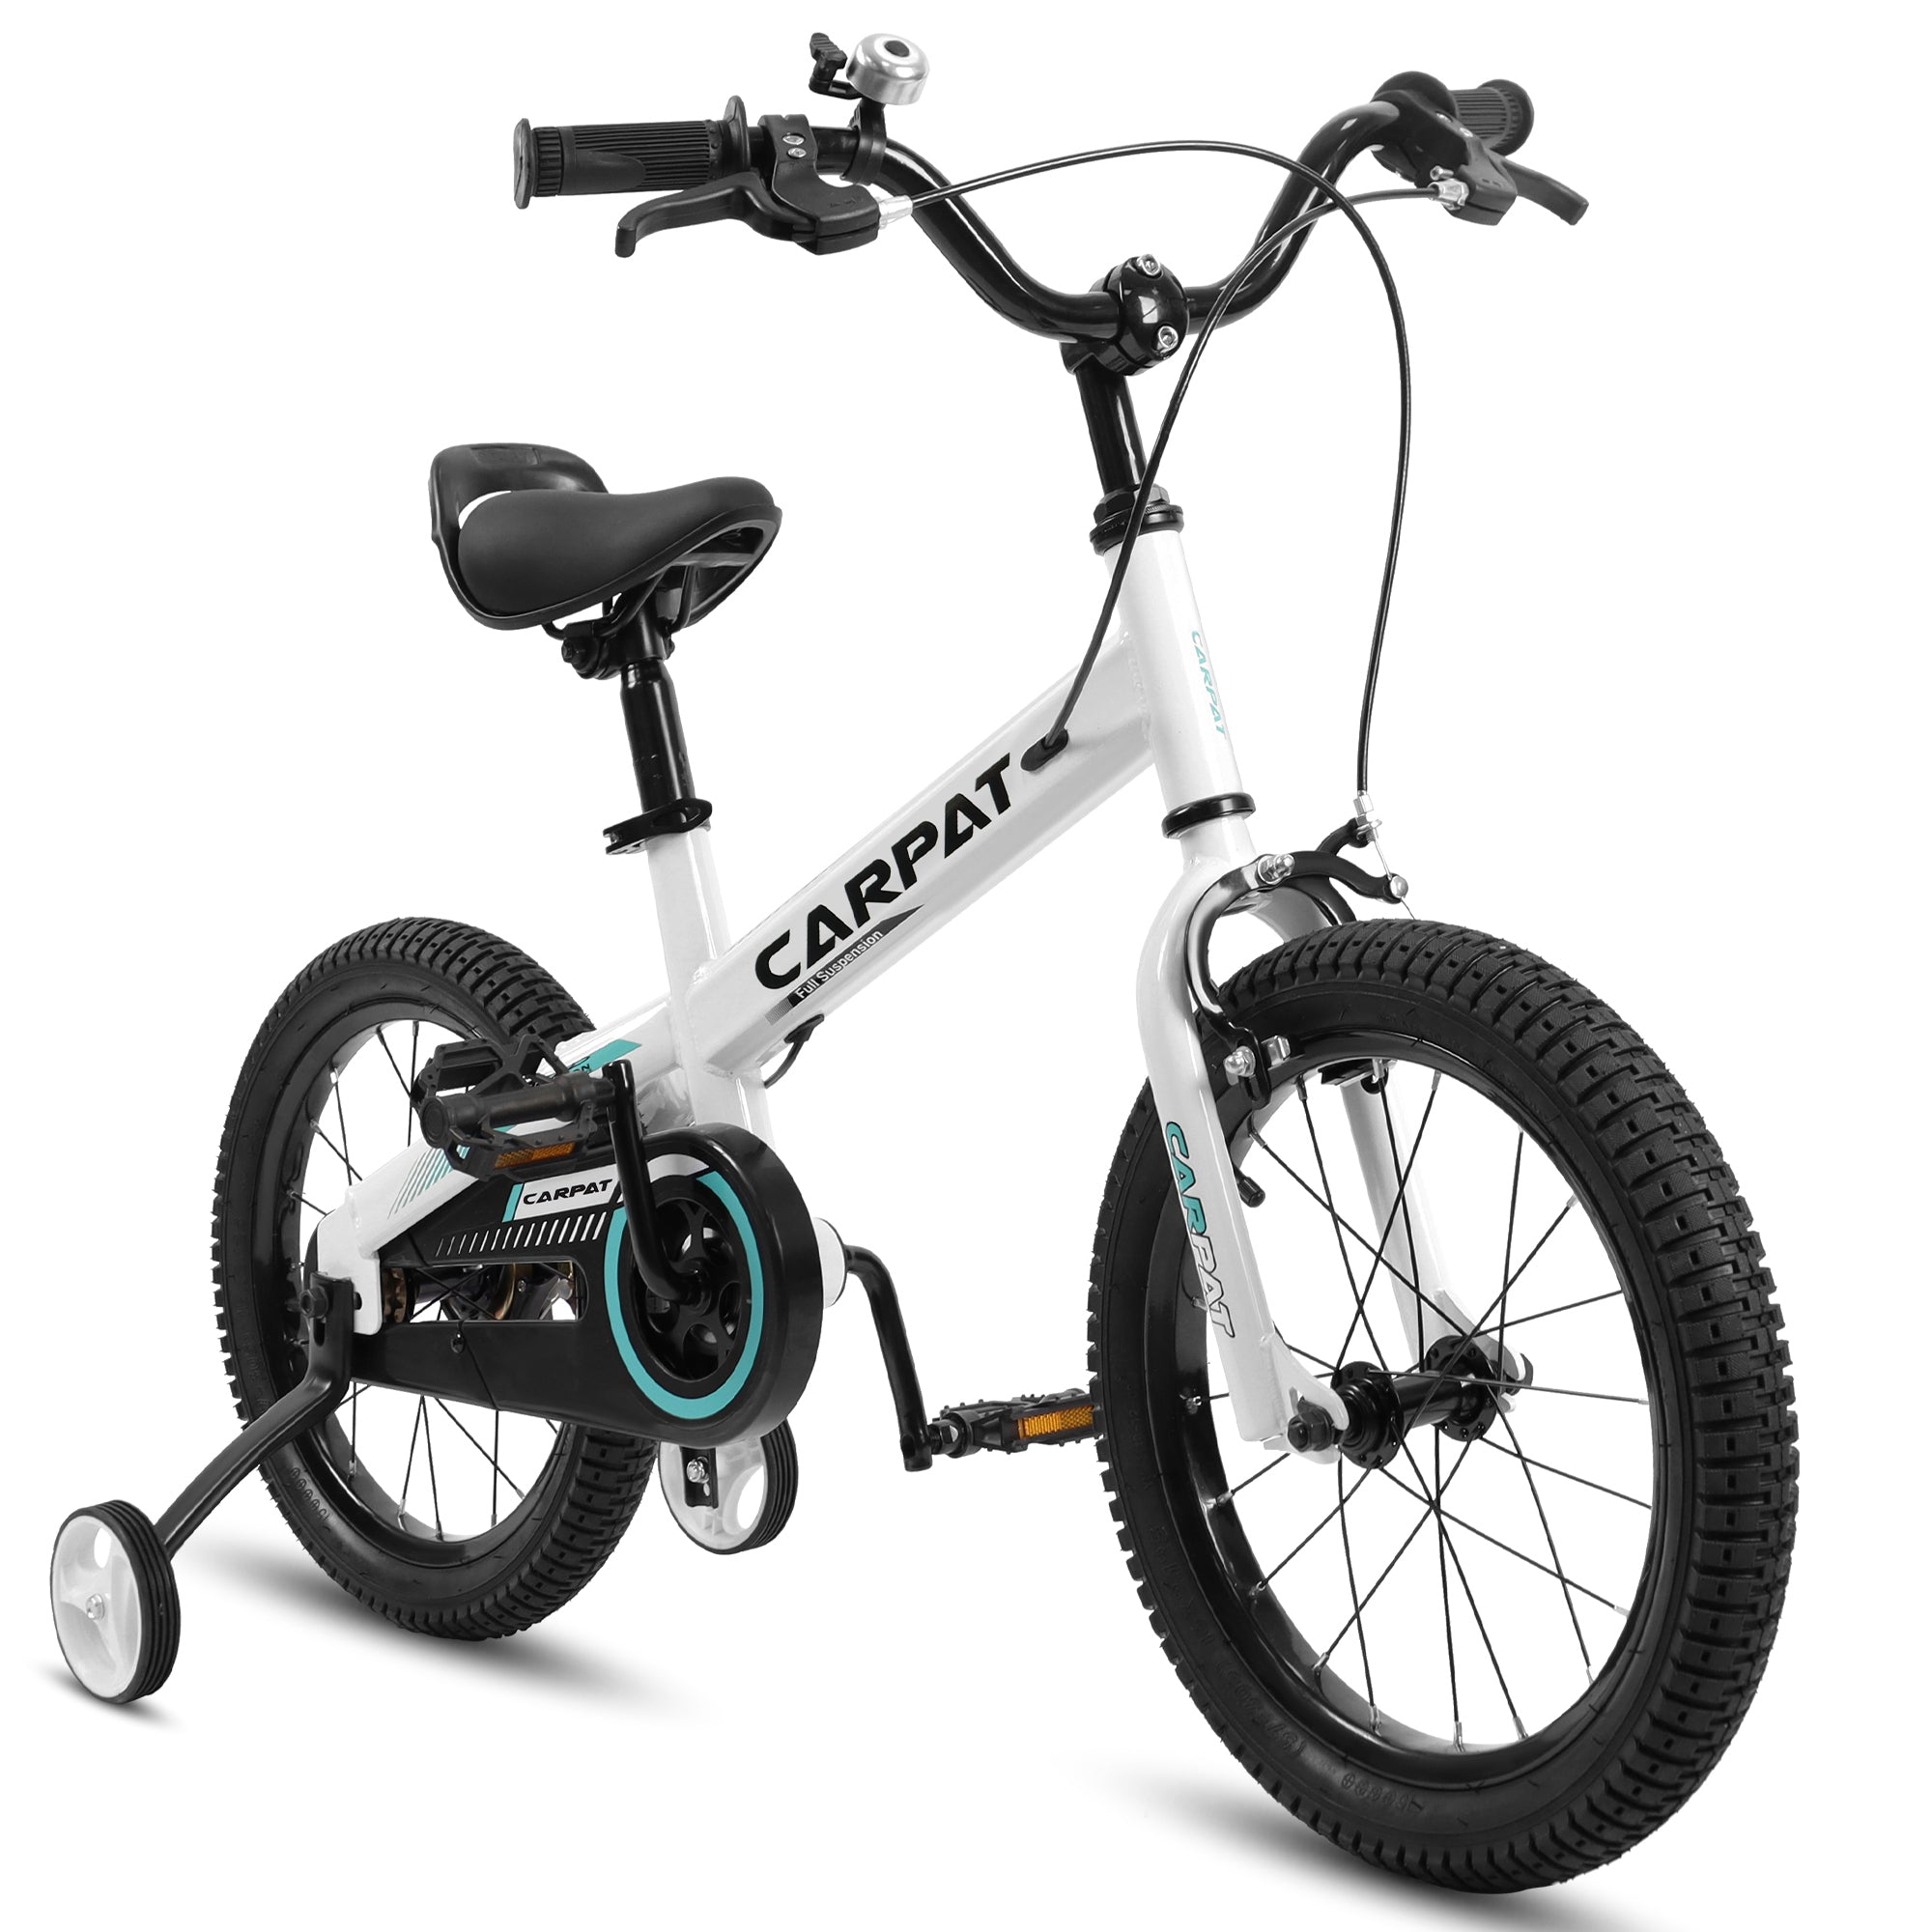 C14112A-Ecarpat-Kids'-Bike-14-Inch-Wheels,-1-Speed-Boys-Girls-Child-Bicycles-For-3-5-Years,-With-Removable-Training-Wheels-Baby-Toys,-Coaster+V-Brake-Exercise-&-Fitness